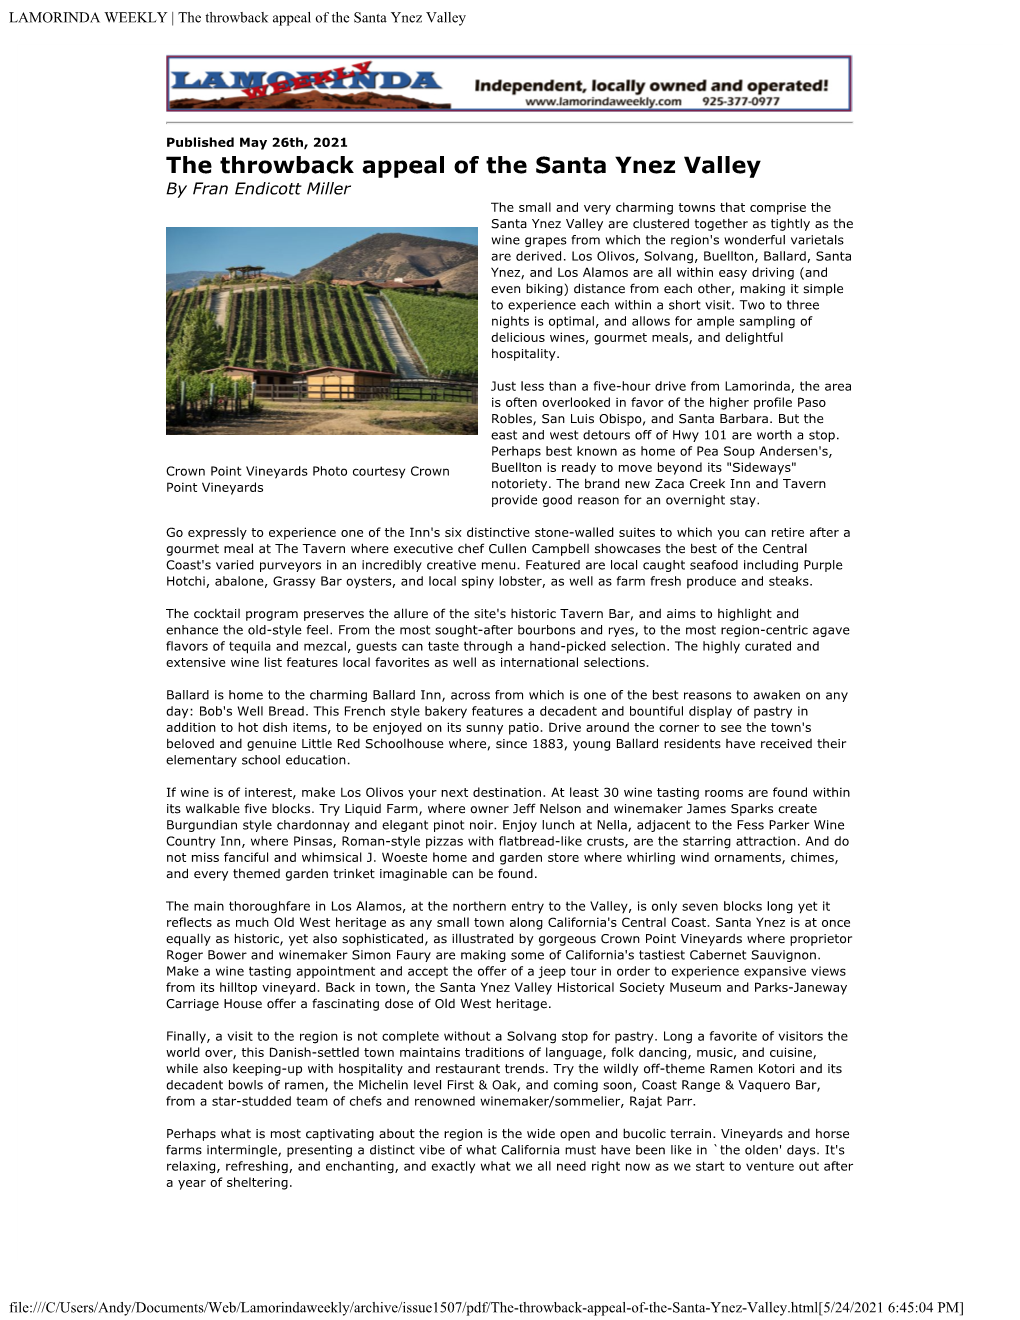 The Throwback Appeal of the Santa Ynez Valley